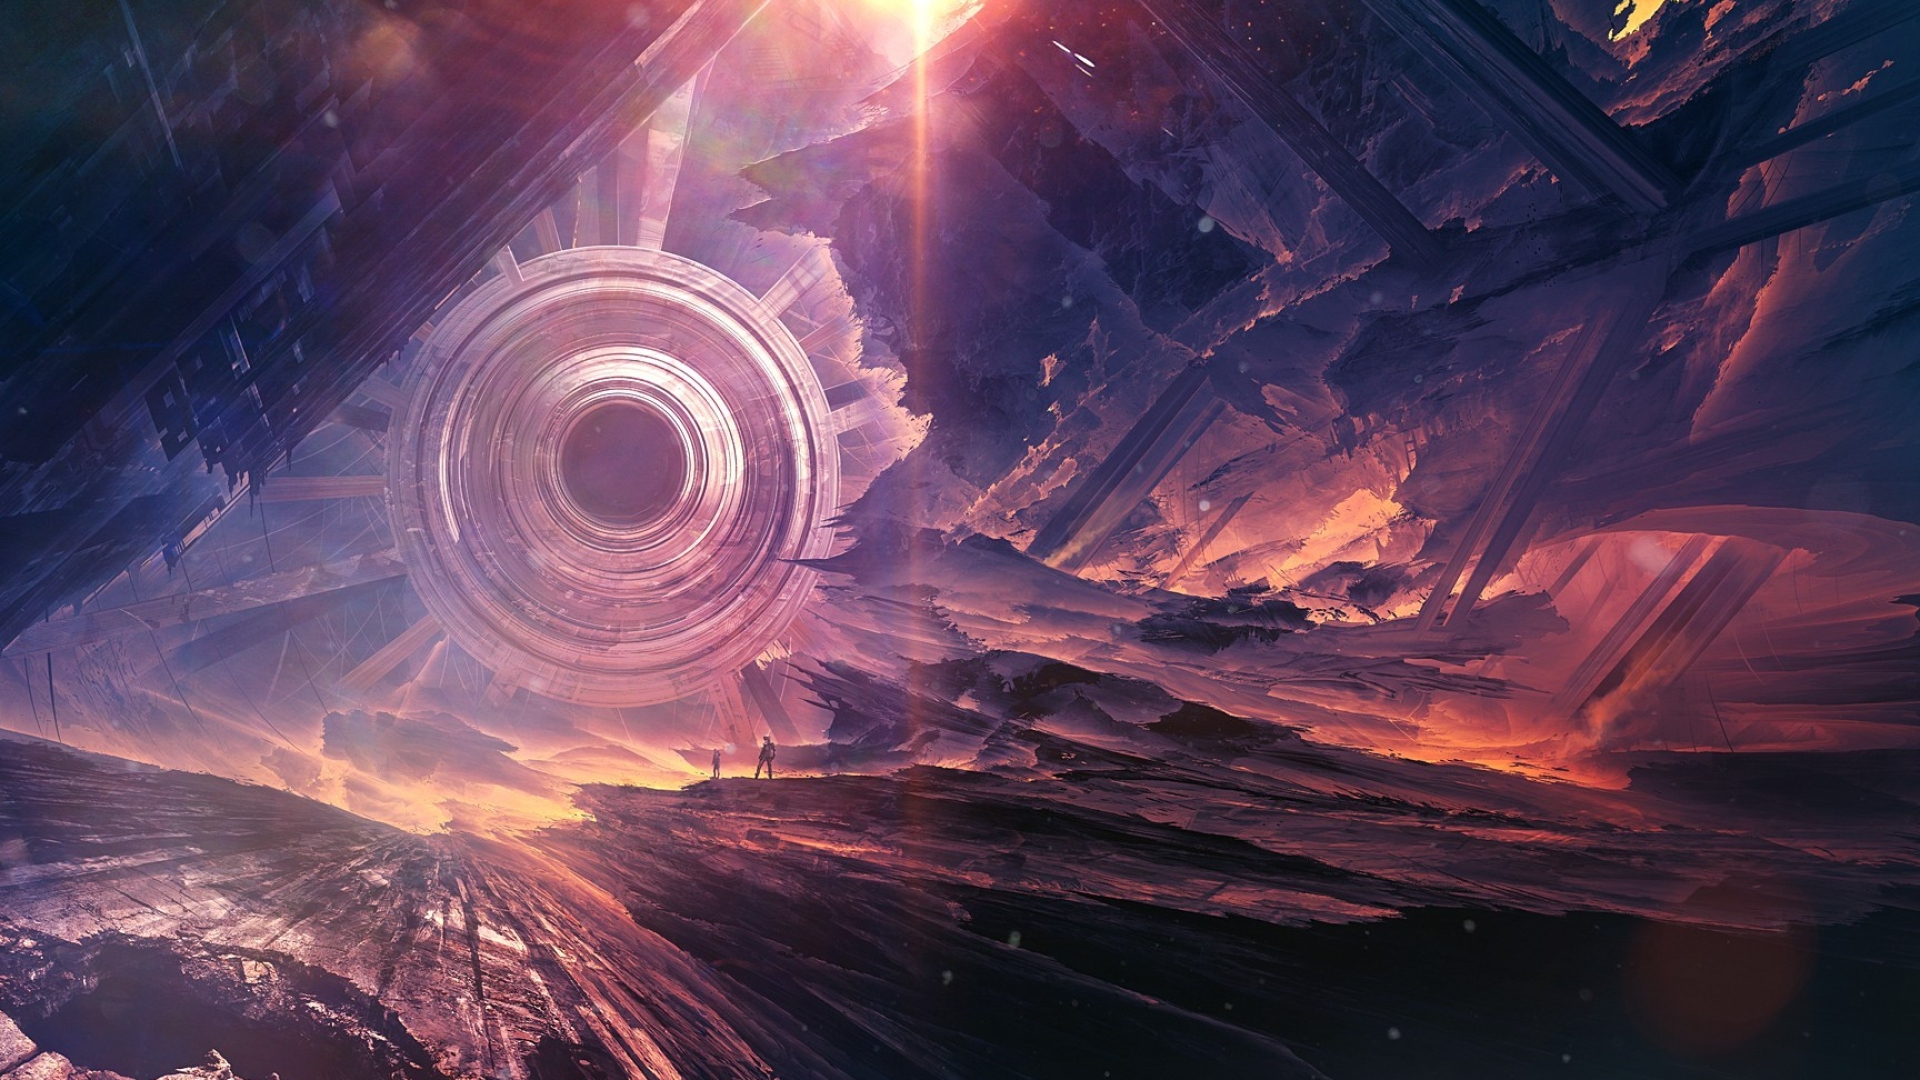 1920x1080 Wallpaper : digital art, futuristic, surreal, science fiction, atmosphere, universe, darkness, screenshot, computer wallpaper, outer space, geological phenomenon aJapaneseDream 167621 HD Wallpapers